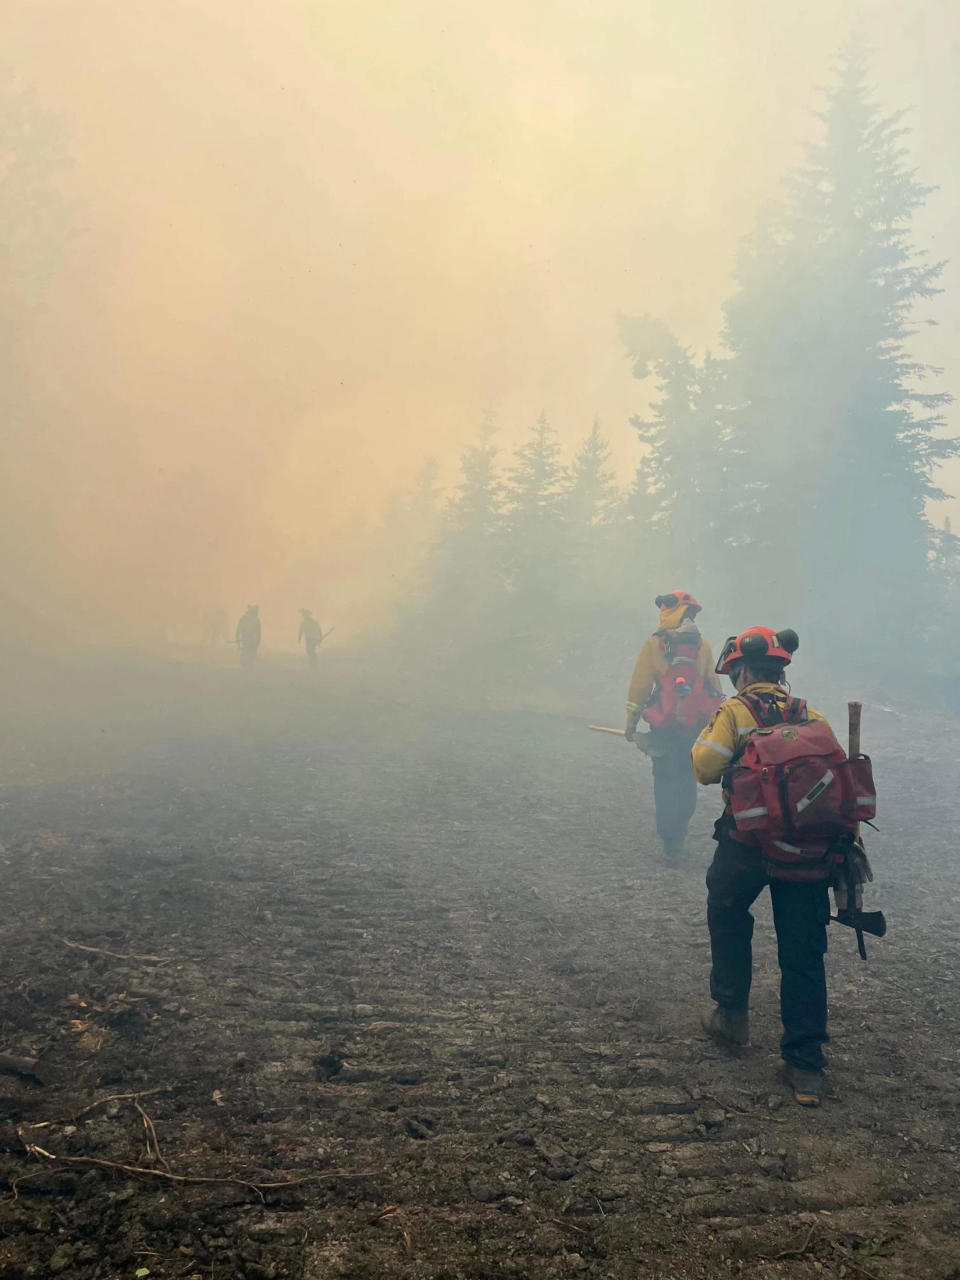 Firefighters patrol the Kimiwan Complex Fire SWF068 north of High Prairie, Alberta, Canada in an undated photograph. / Credit: ALBERTA WILDFIRE via Reuters